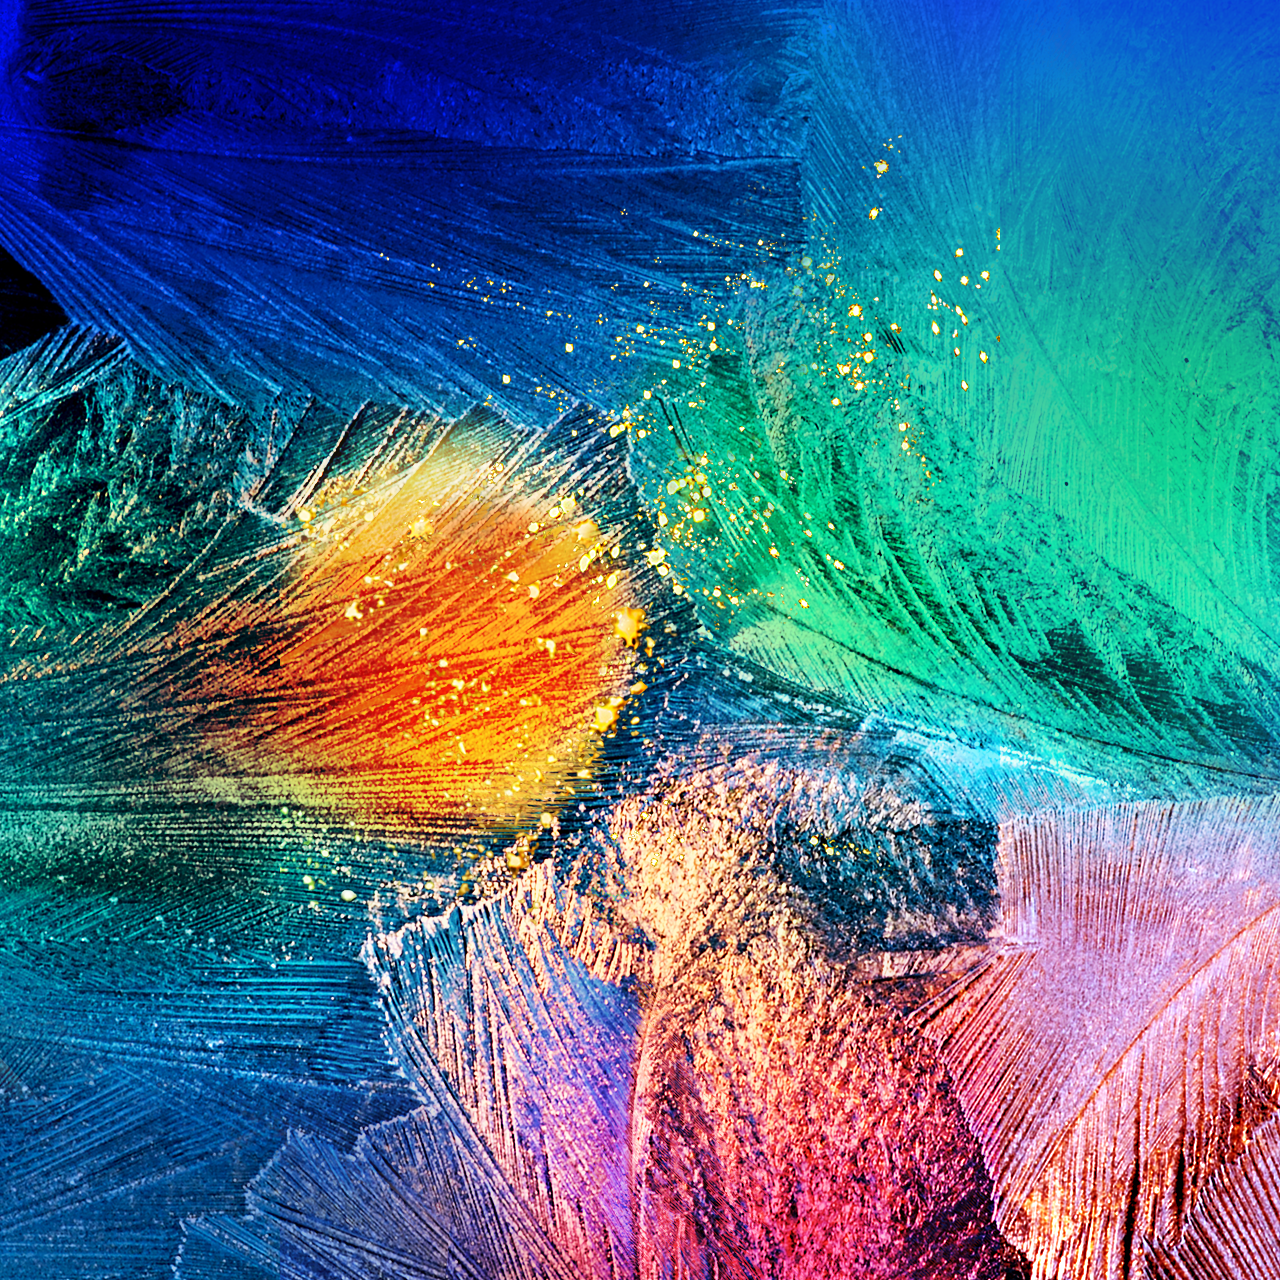 Download all 9 Samsung Galaxy Alpha wallpapers here